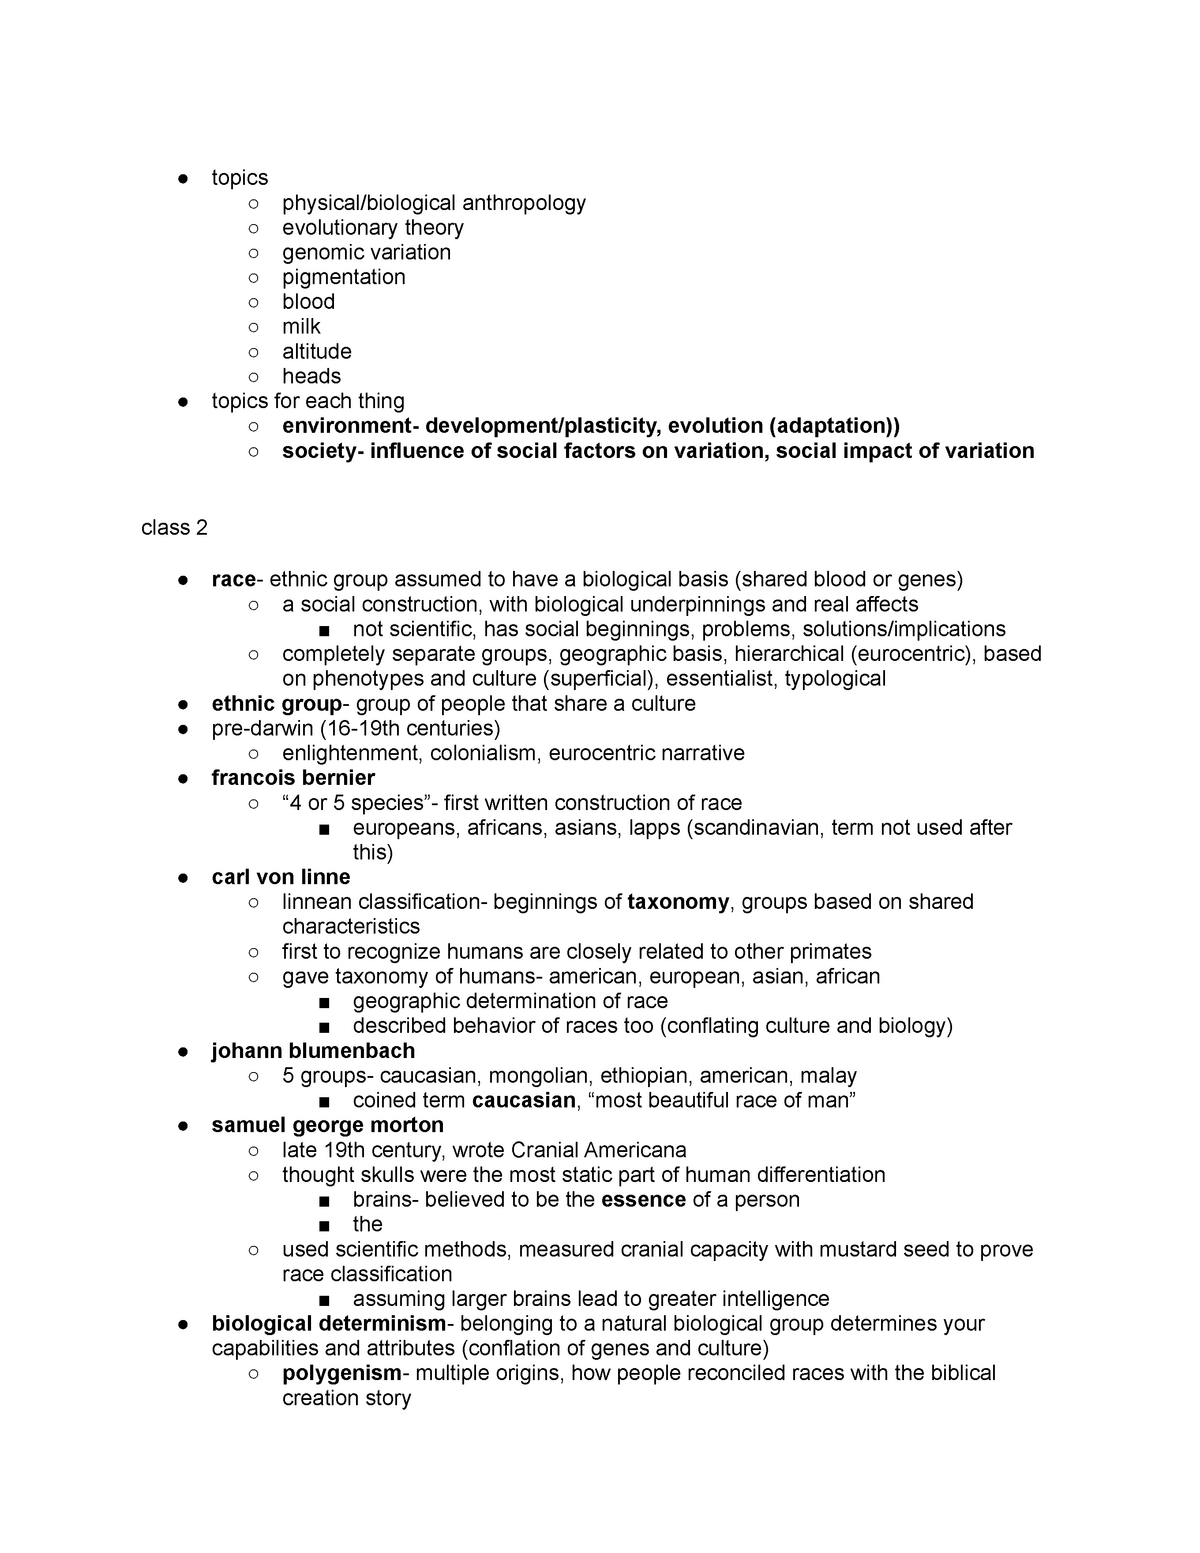 Midterm Study Guide - topics physical/biological anthropology ...